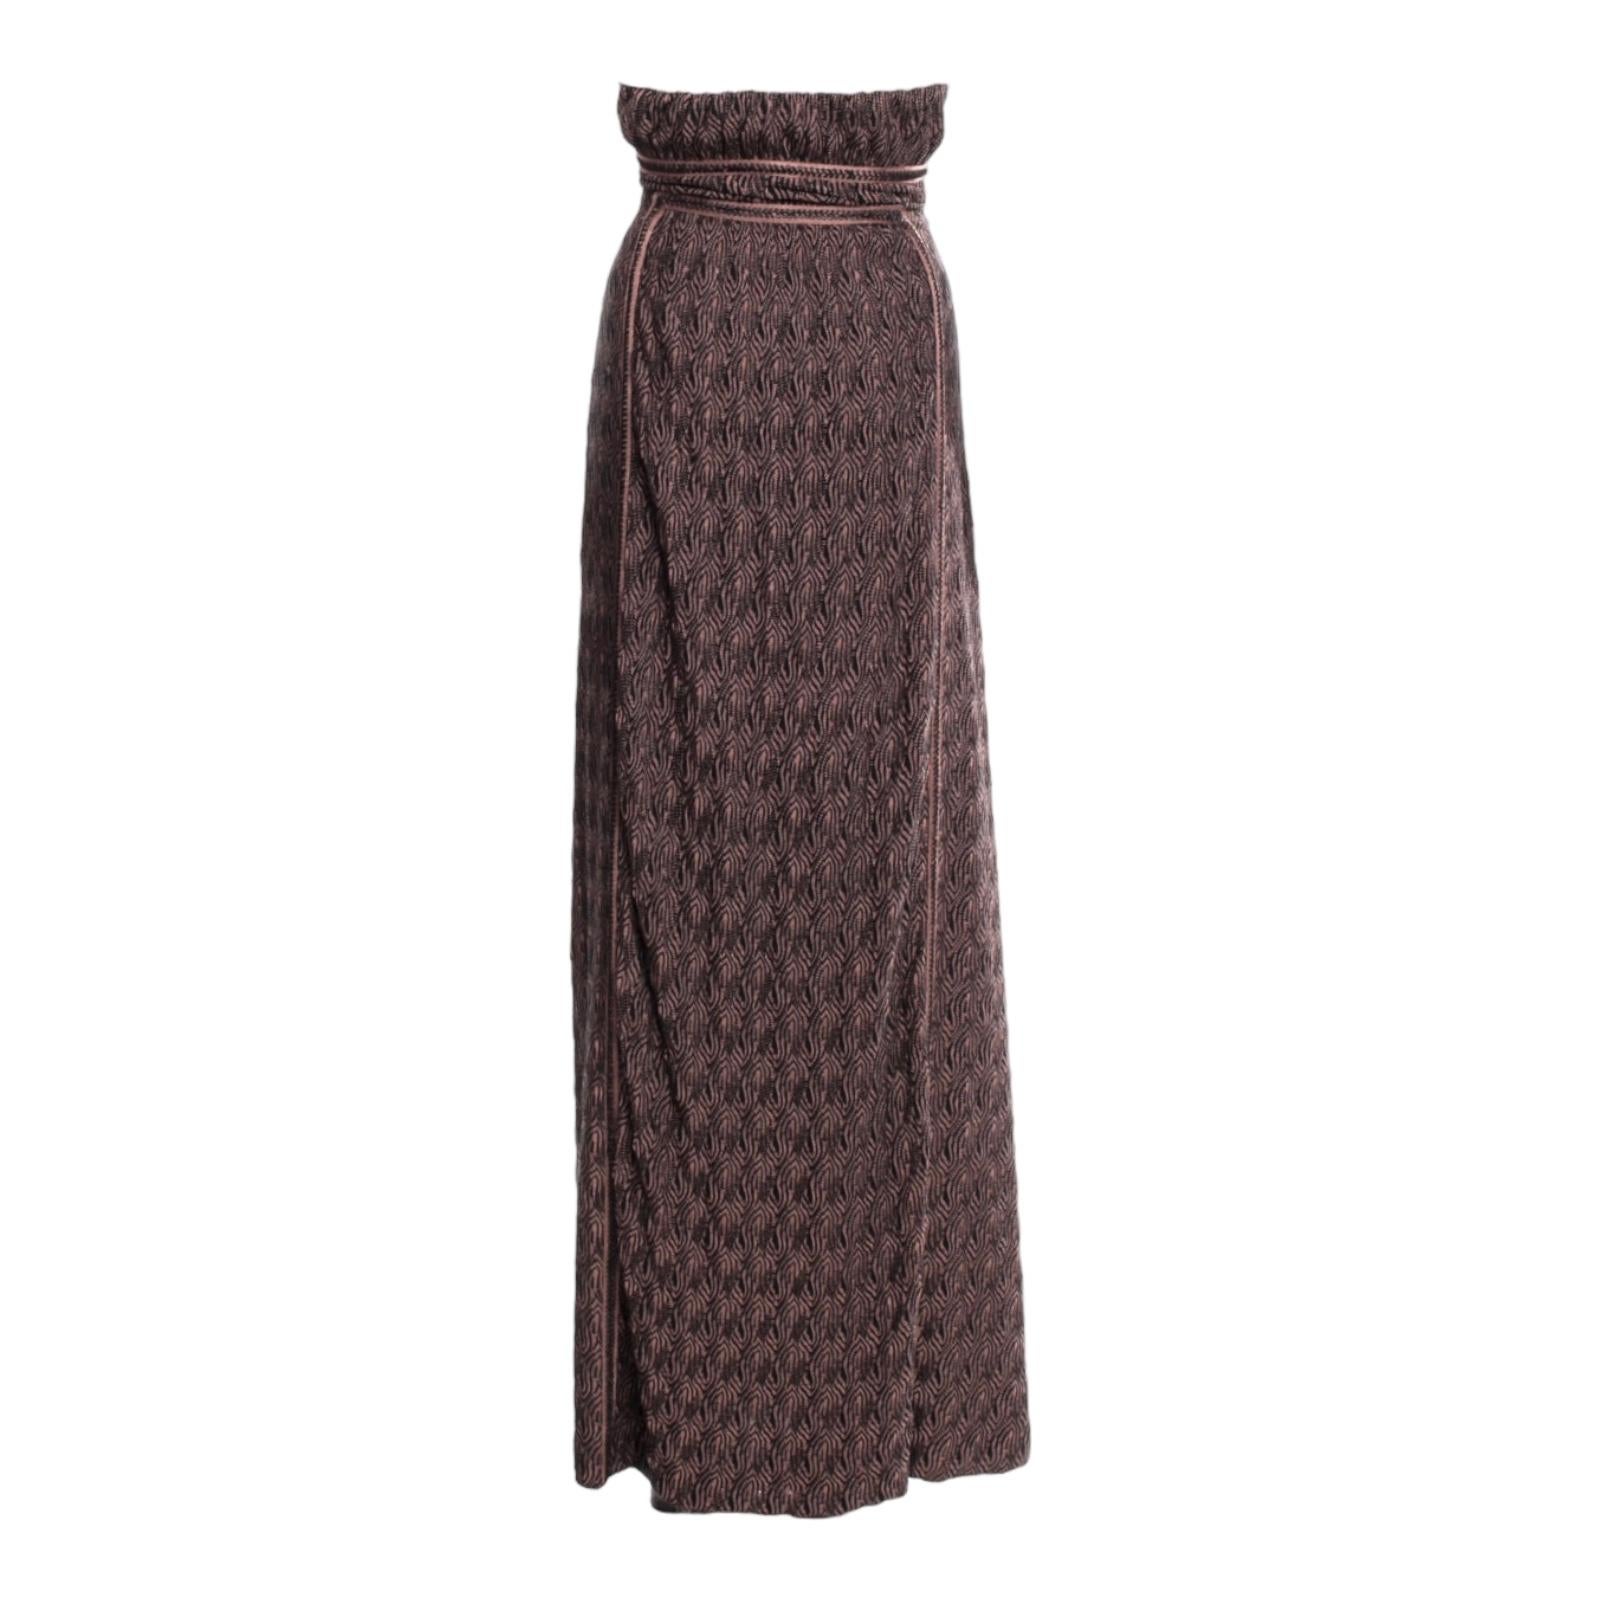 Stunning evening gown by MISSONI
Amazing brown colors
Crochet-knit detail trimming
Built-in corset for a perfect décolleté and fit
Beautiful crochet-knit fabric in MISSONI's signature zigzag design
Fully lined with silk
Full length
Made in Italy
Dry